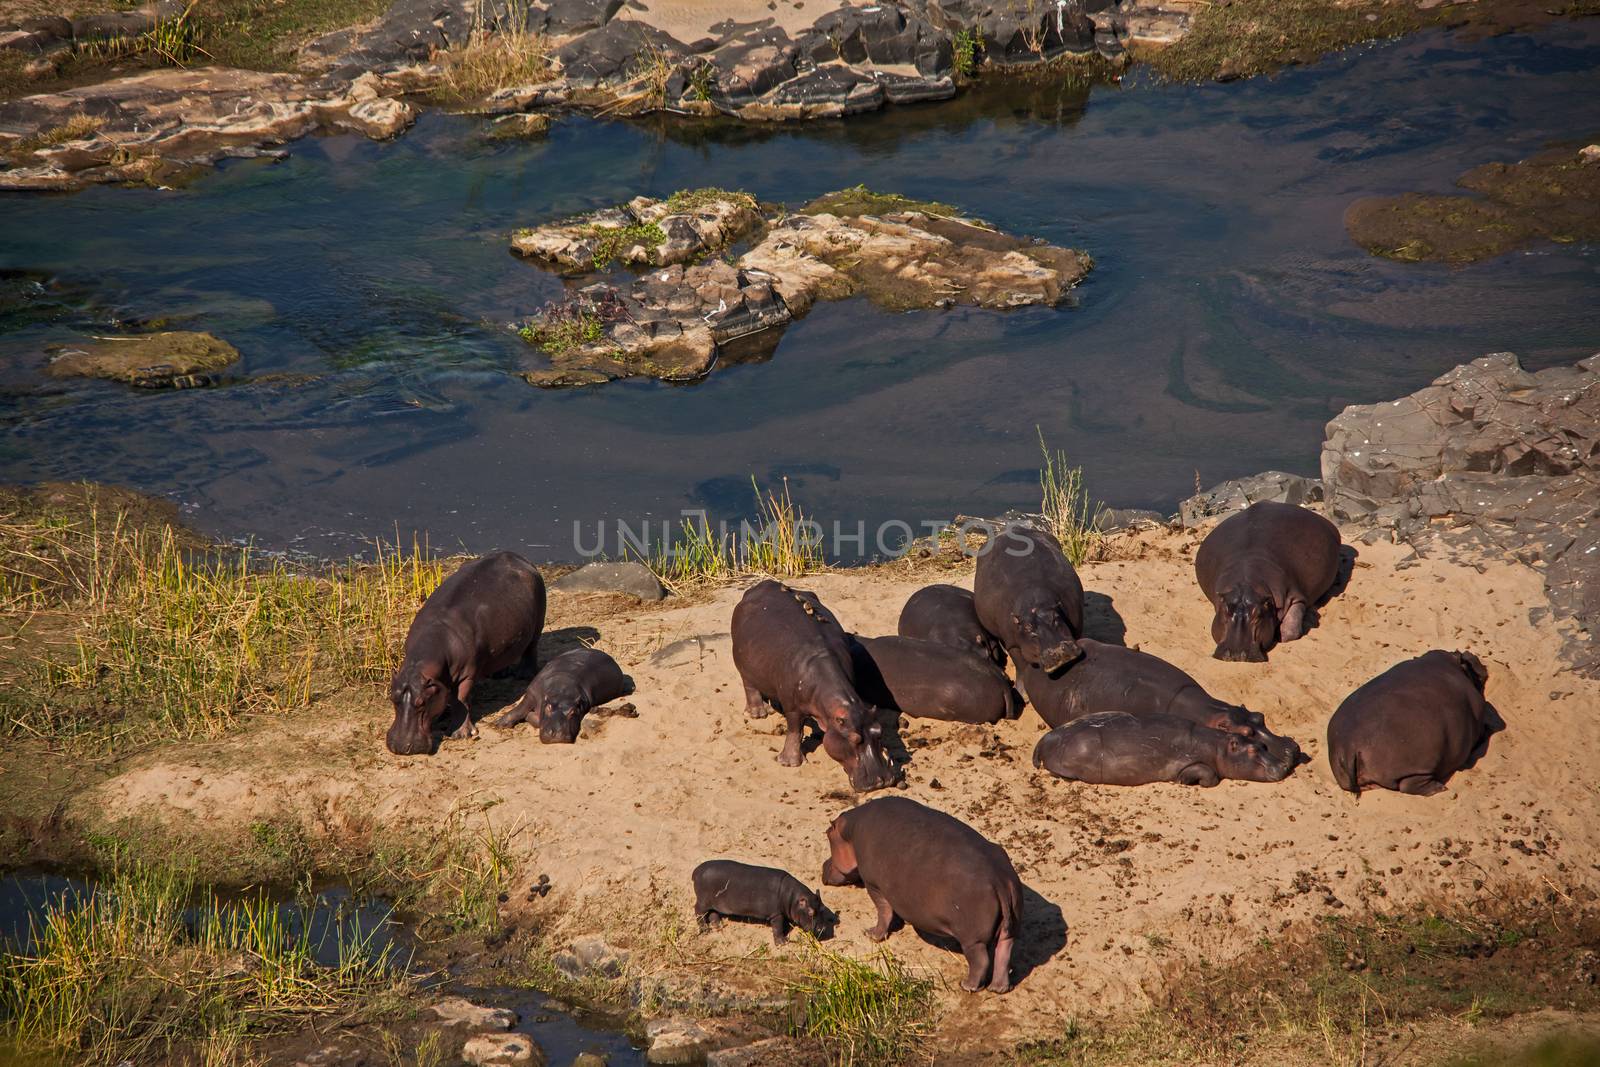 Hippo Beach on Olifants River. by kobus_peche